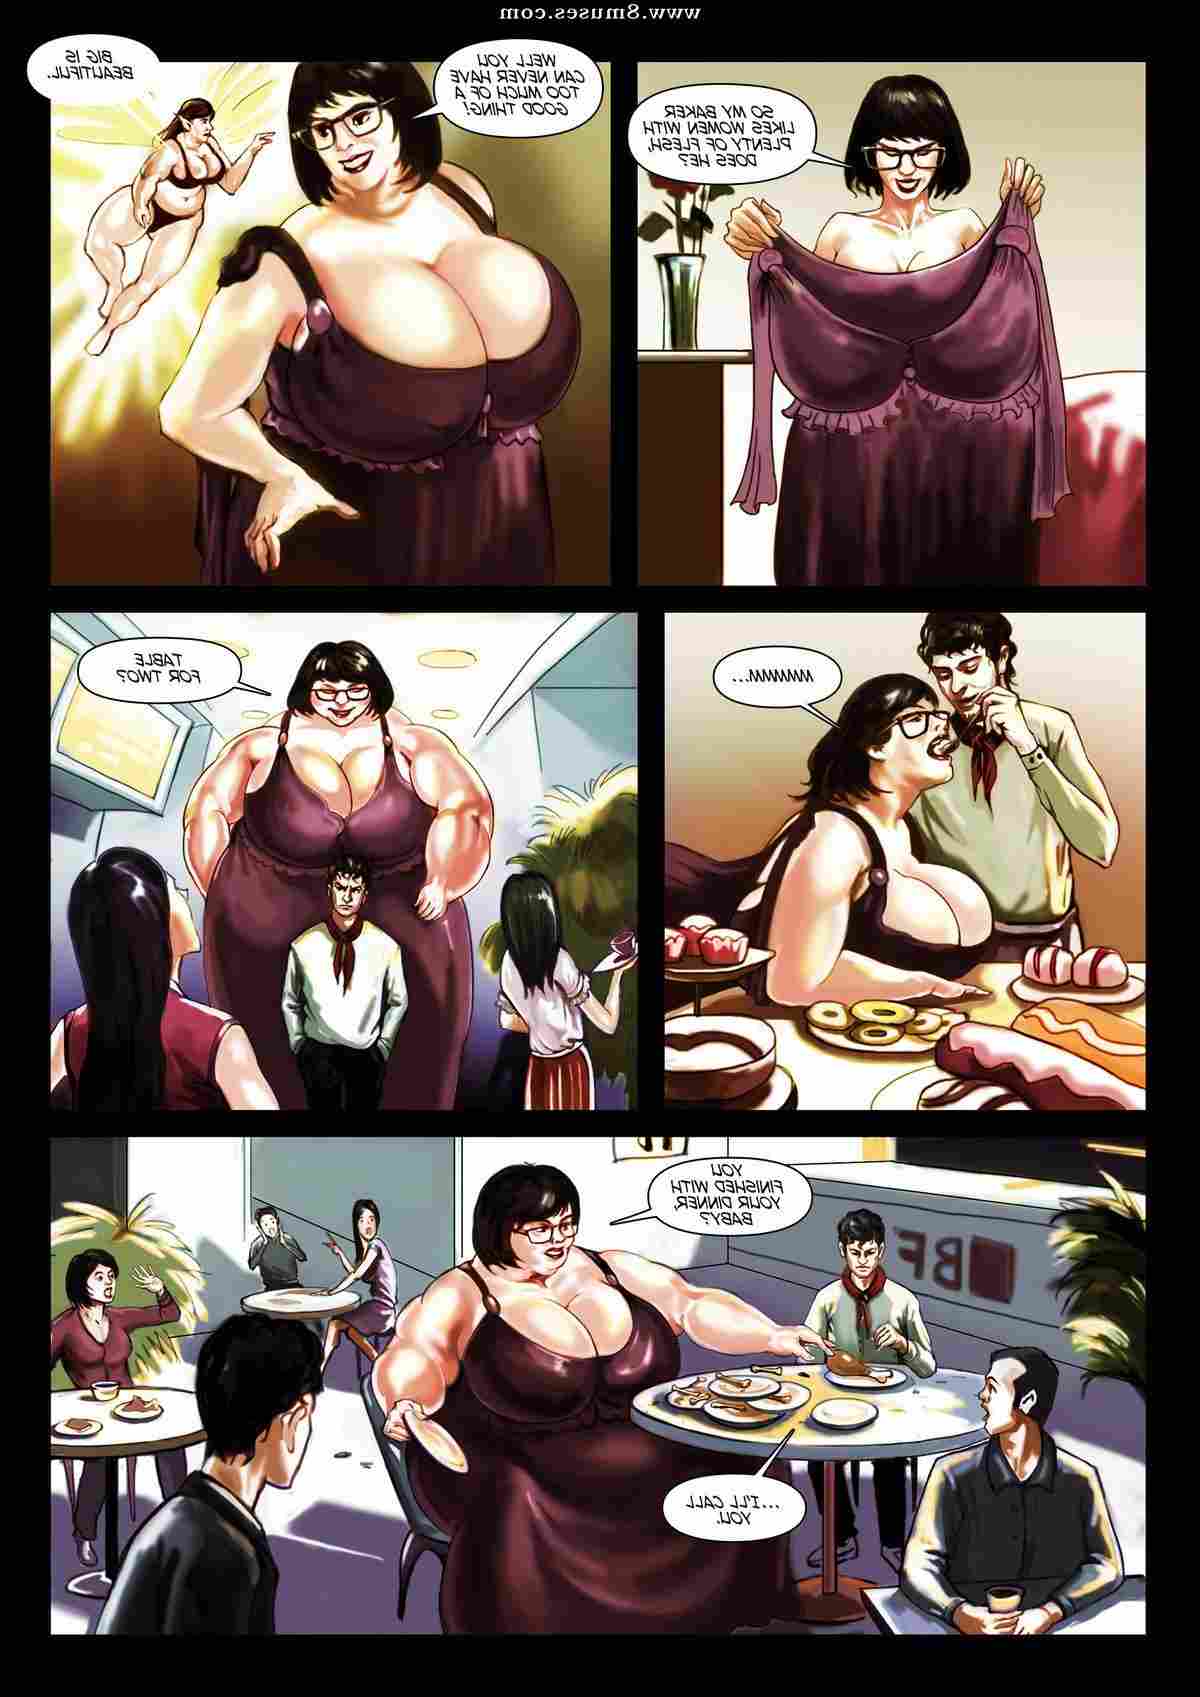 Expansionfan-Comics/All-Sizes-Fit-One/All-Sizes-Fit-One-02 All_Sizes_Fit_One_02__8muses_-_Sex_and_Porn_Comics_11.jpg